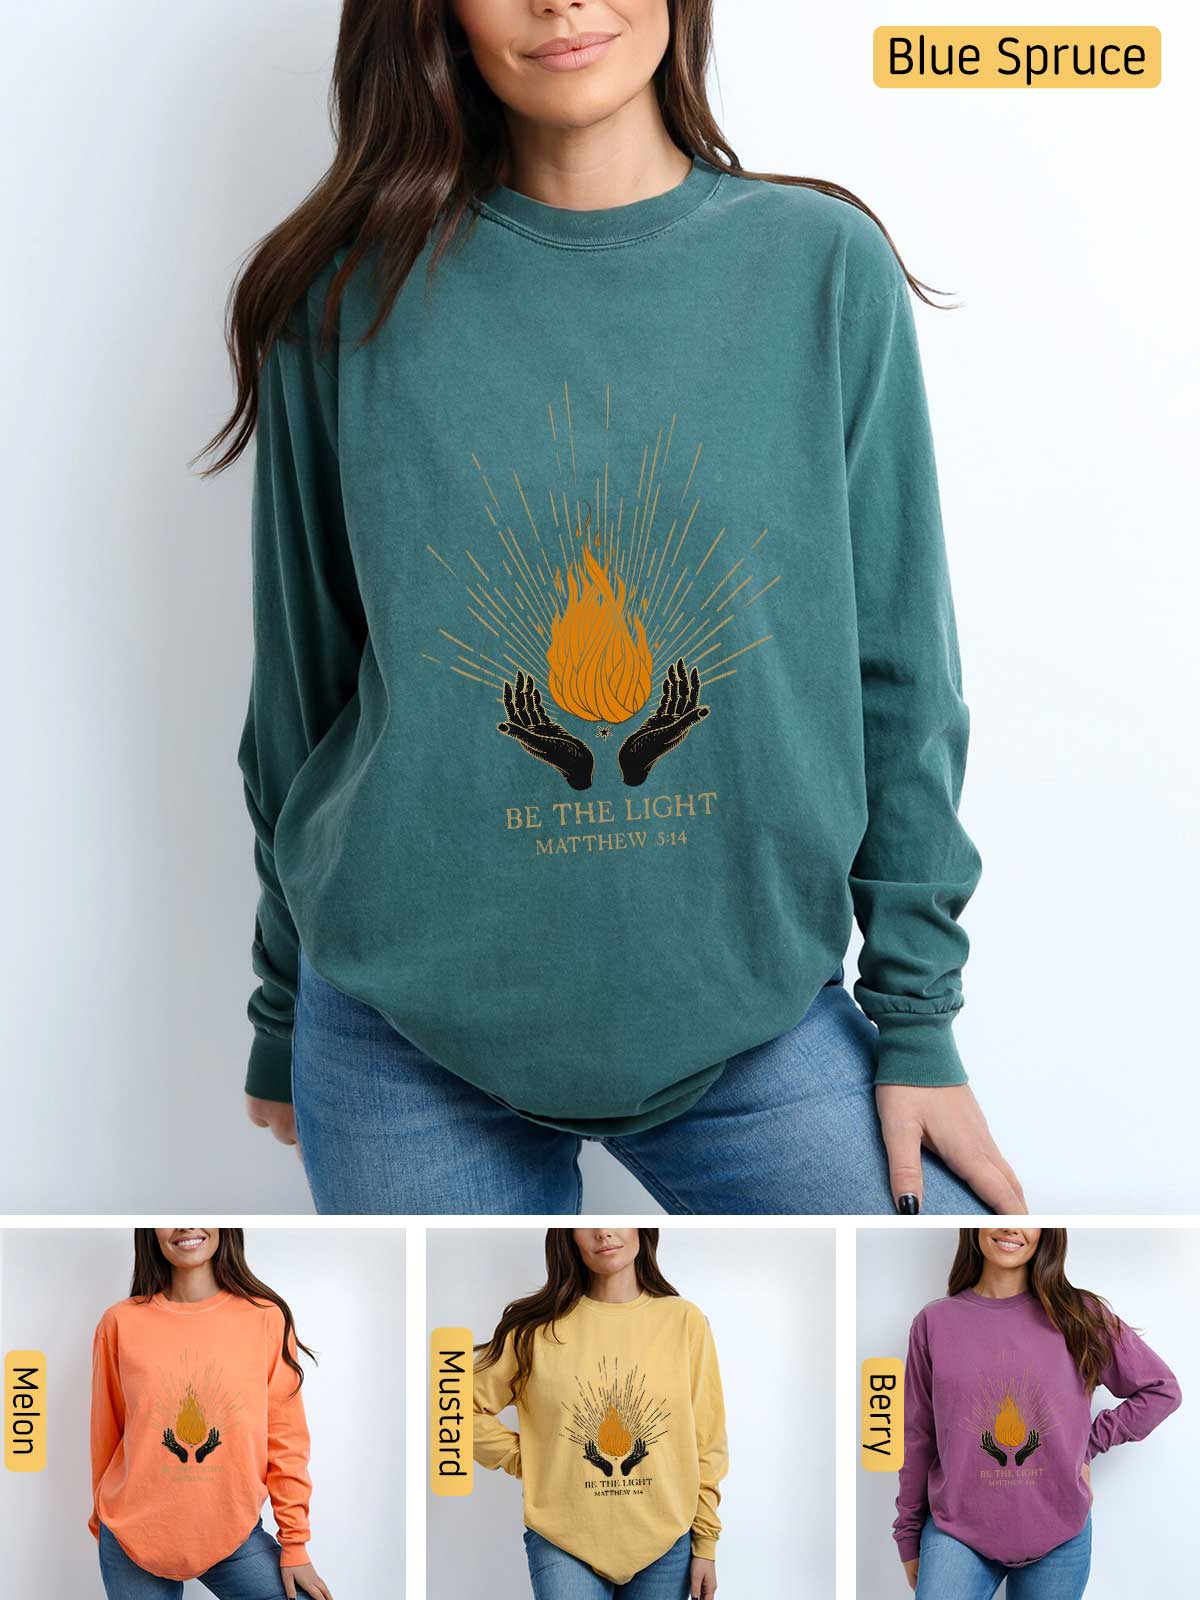 a woman wearing a sweatshirt with the words blue spruce on it